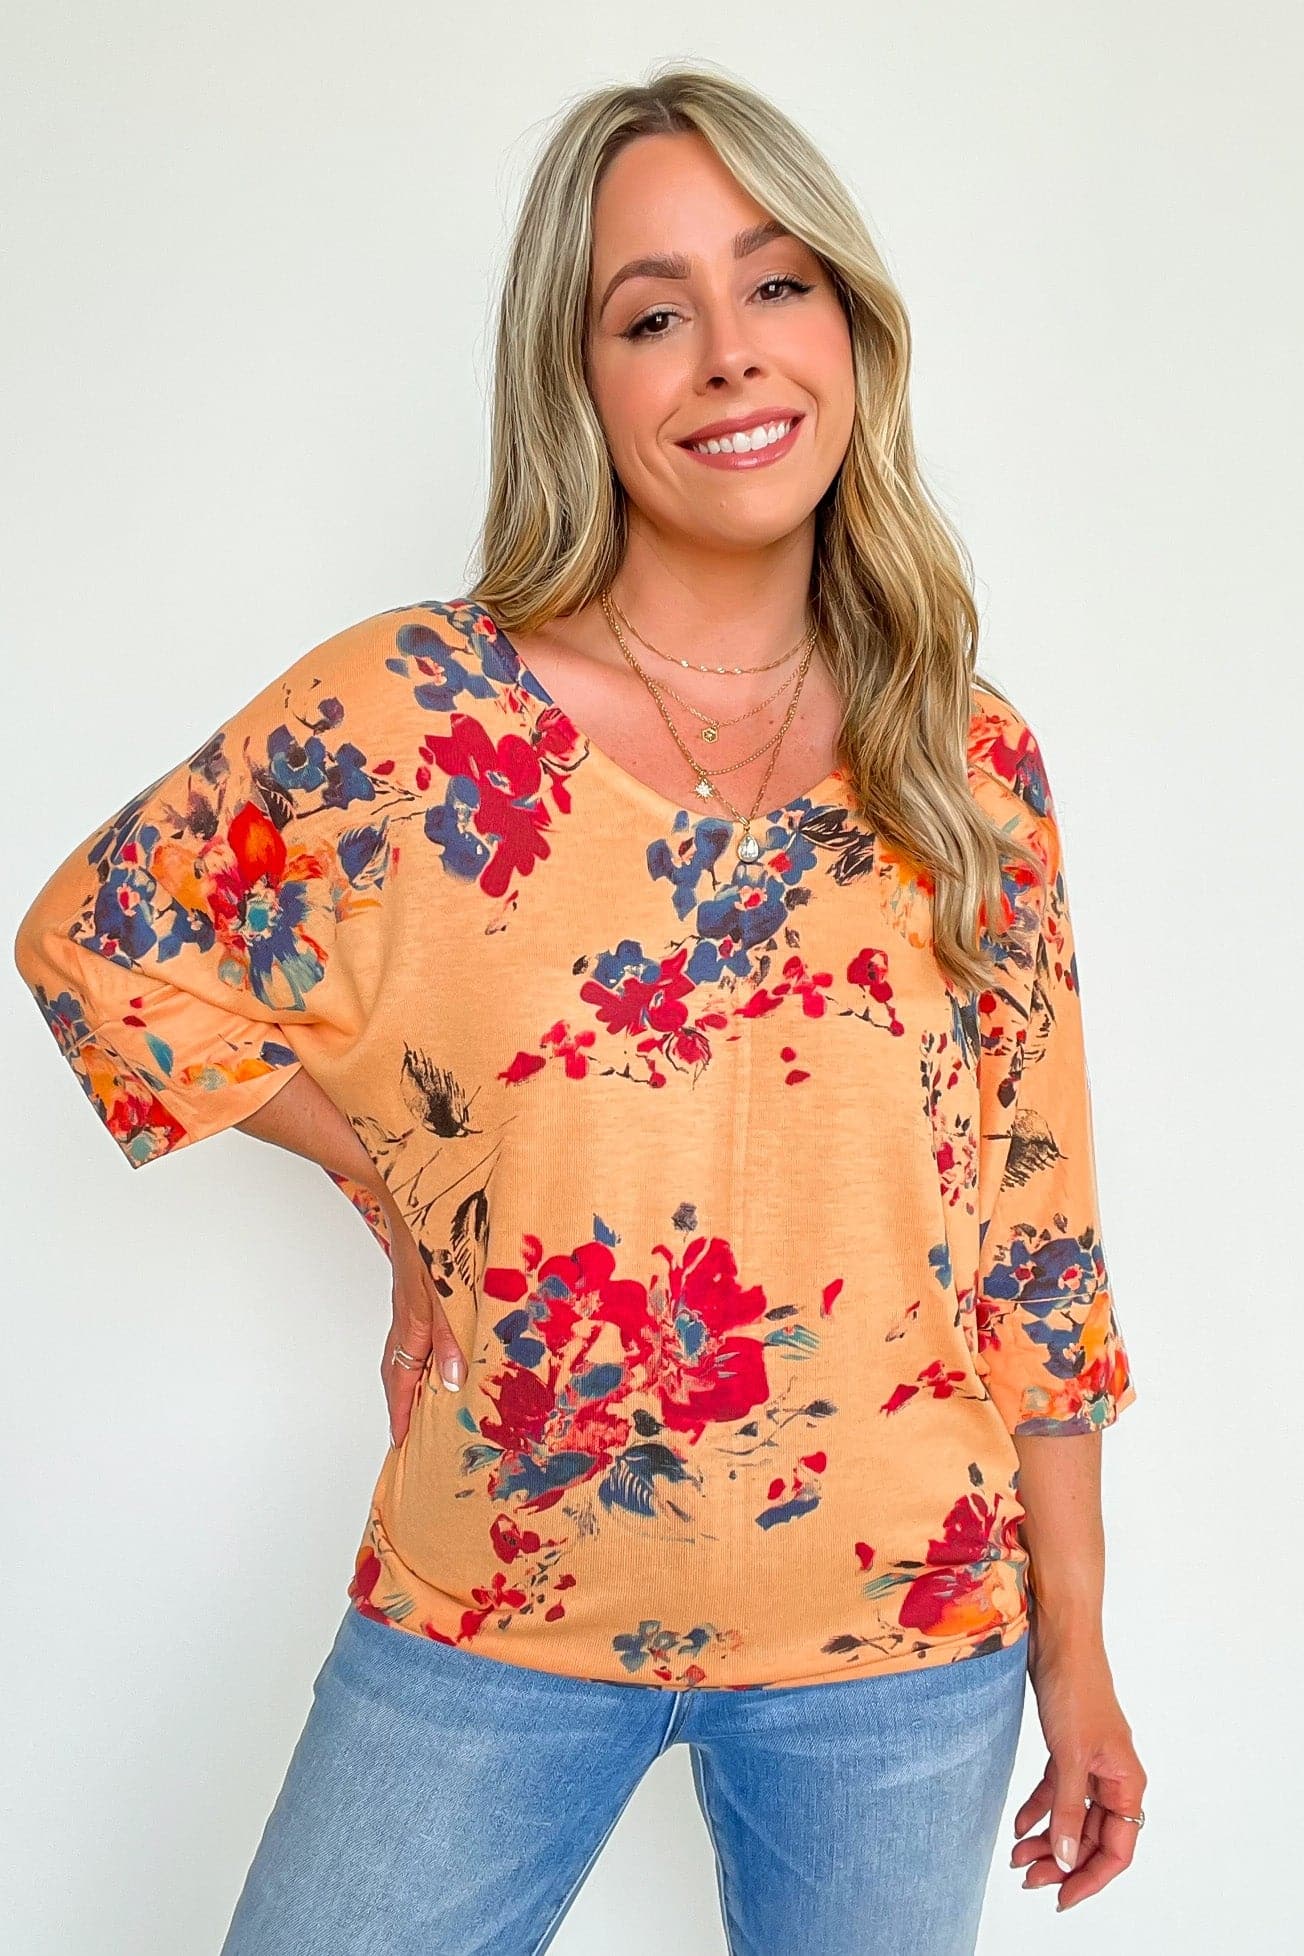  Alluring Expression Criss Cross Back Floral Top - FINAL SALE - Madison and Mallory